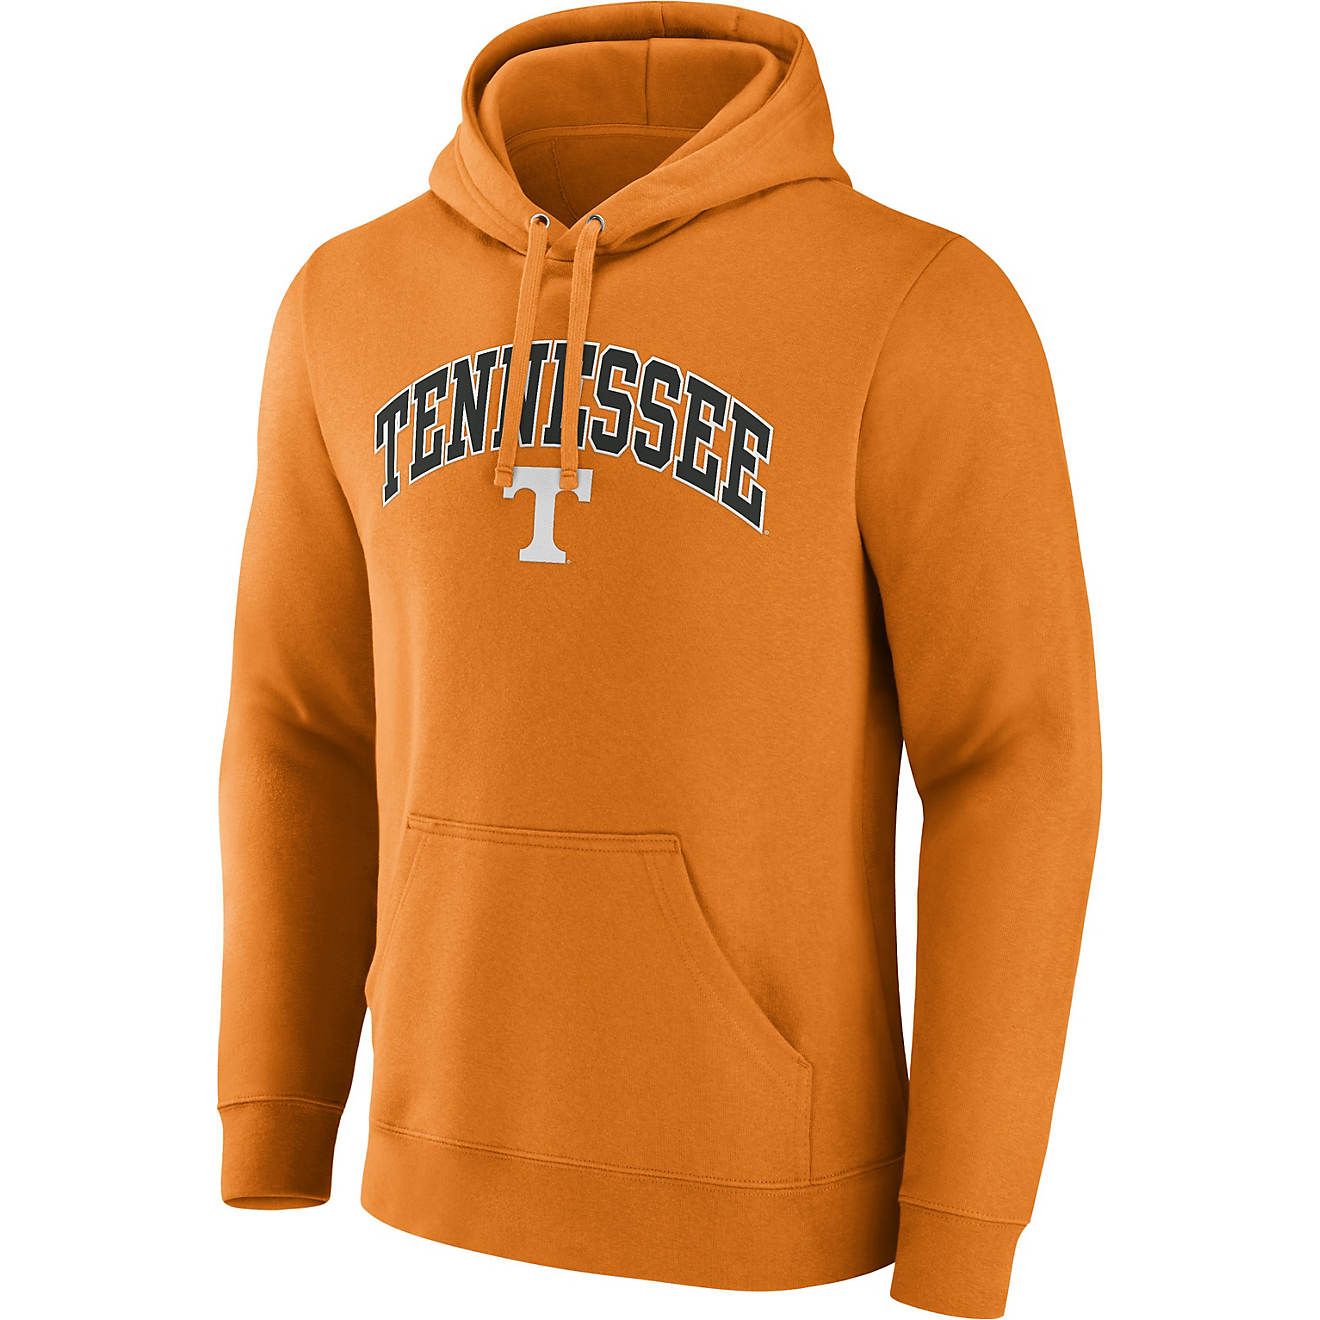 Fanatics Men's University of Tennessee Arched Logo Hoodie                                                                        - view number 1